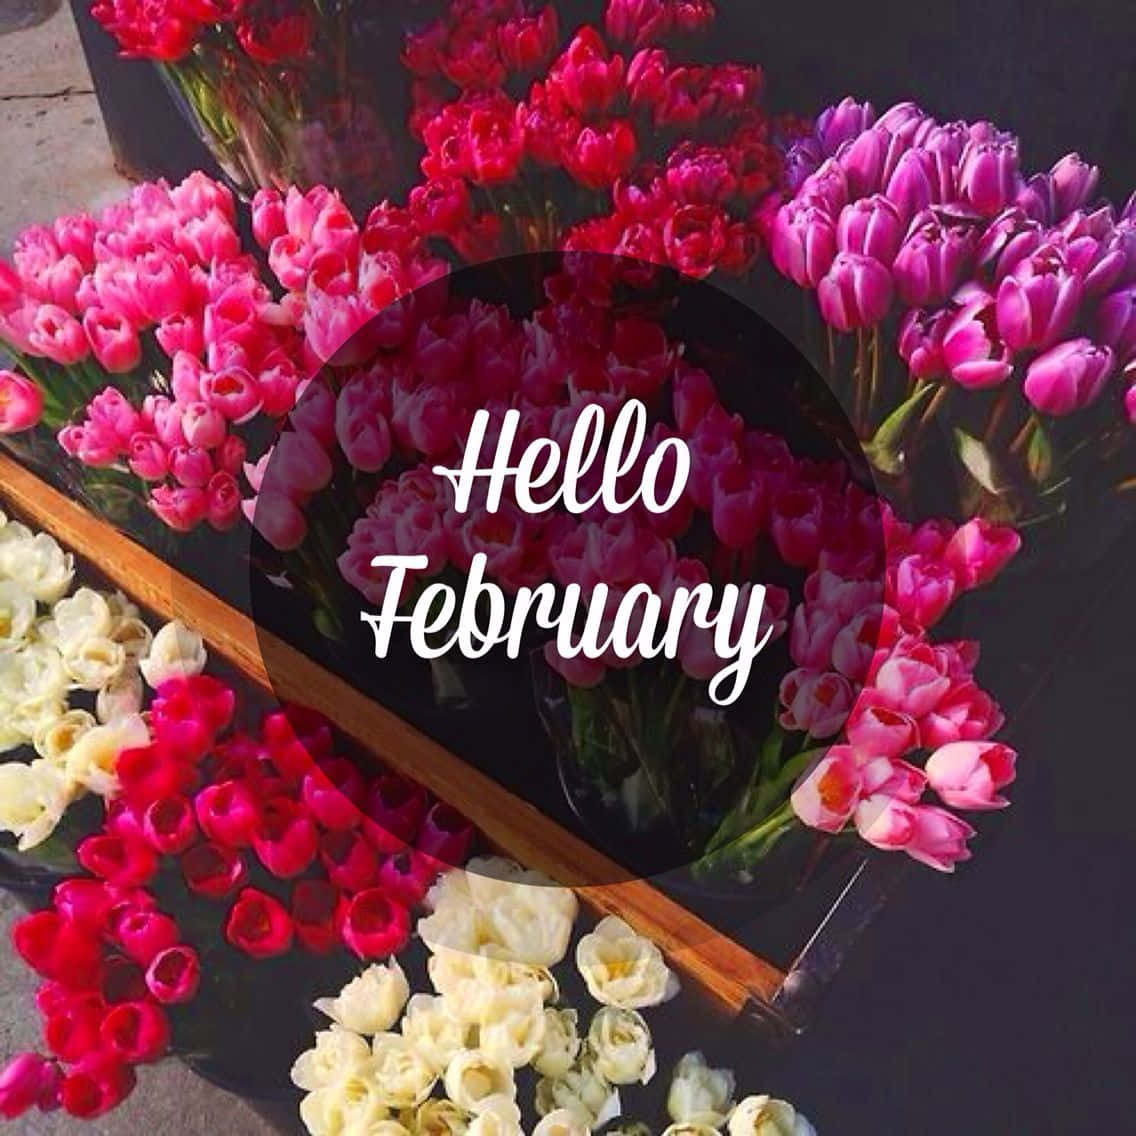 Hello February - A Flower Display With The Words Hello February Wallpaper